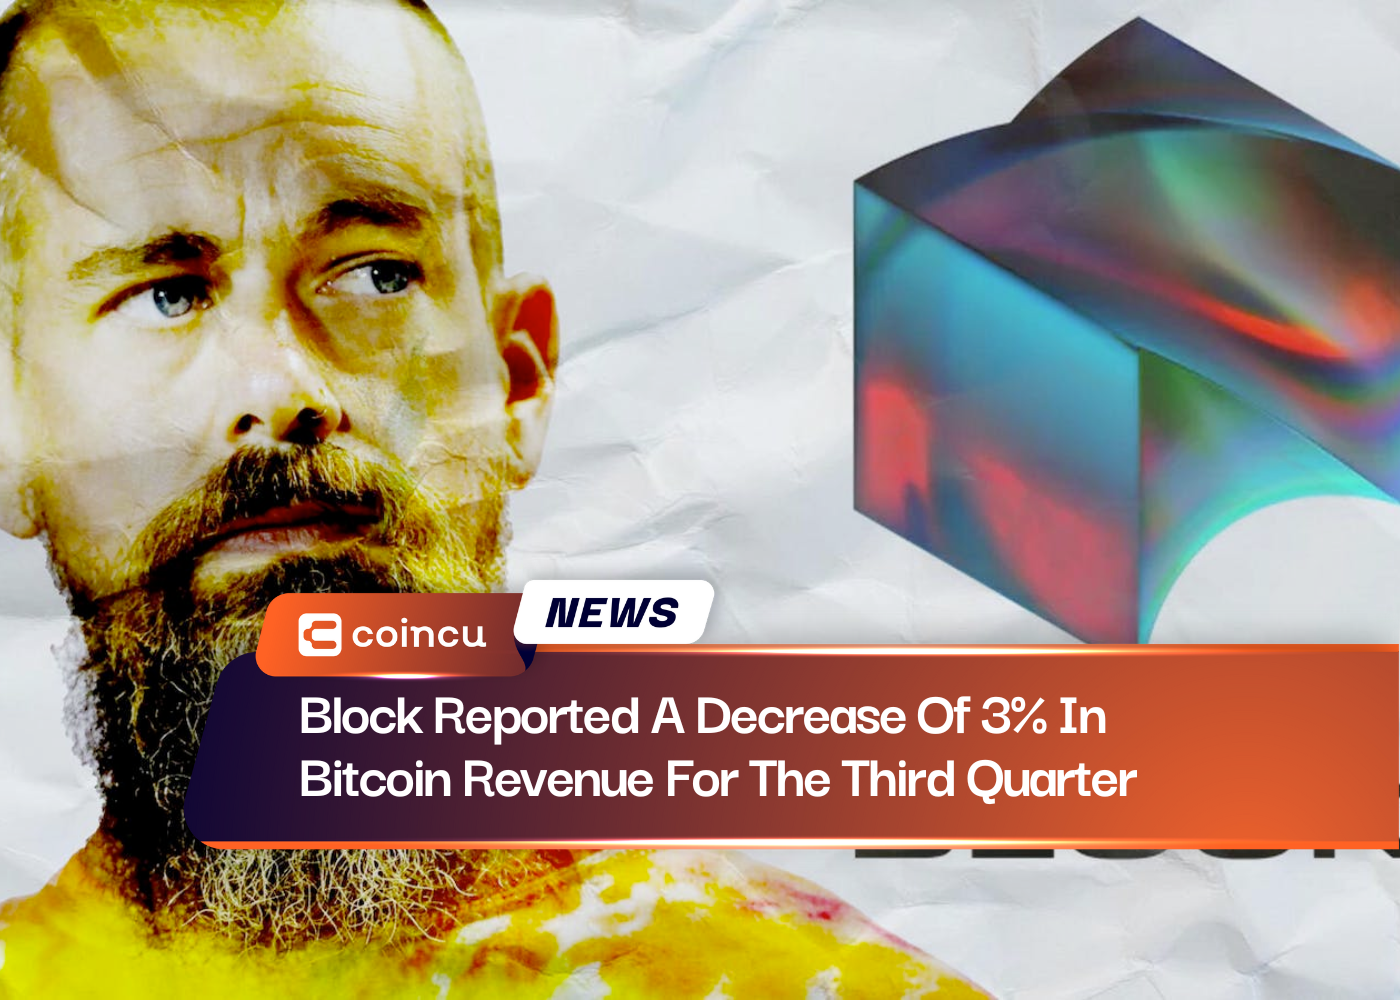 Block Reported A Decrease Of 3% In Bitcoin Revenue For The Third Quarter